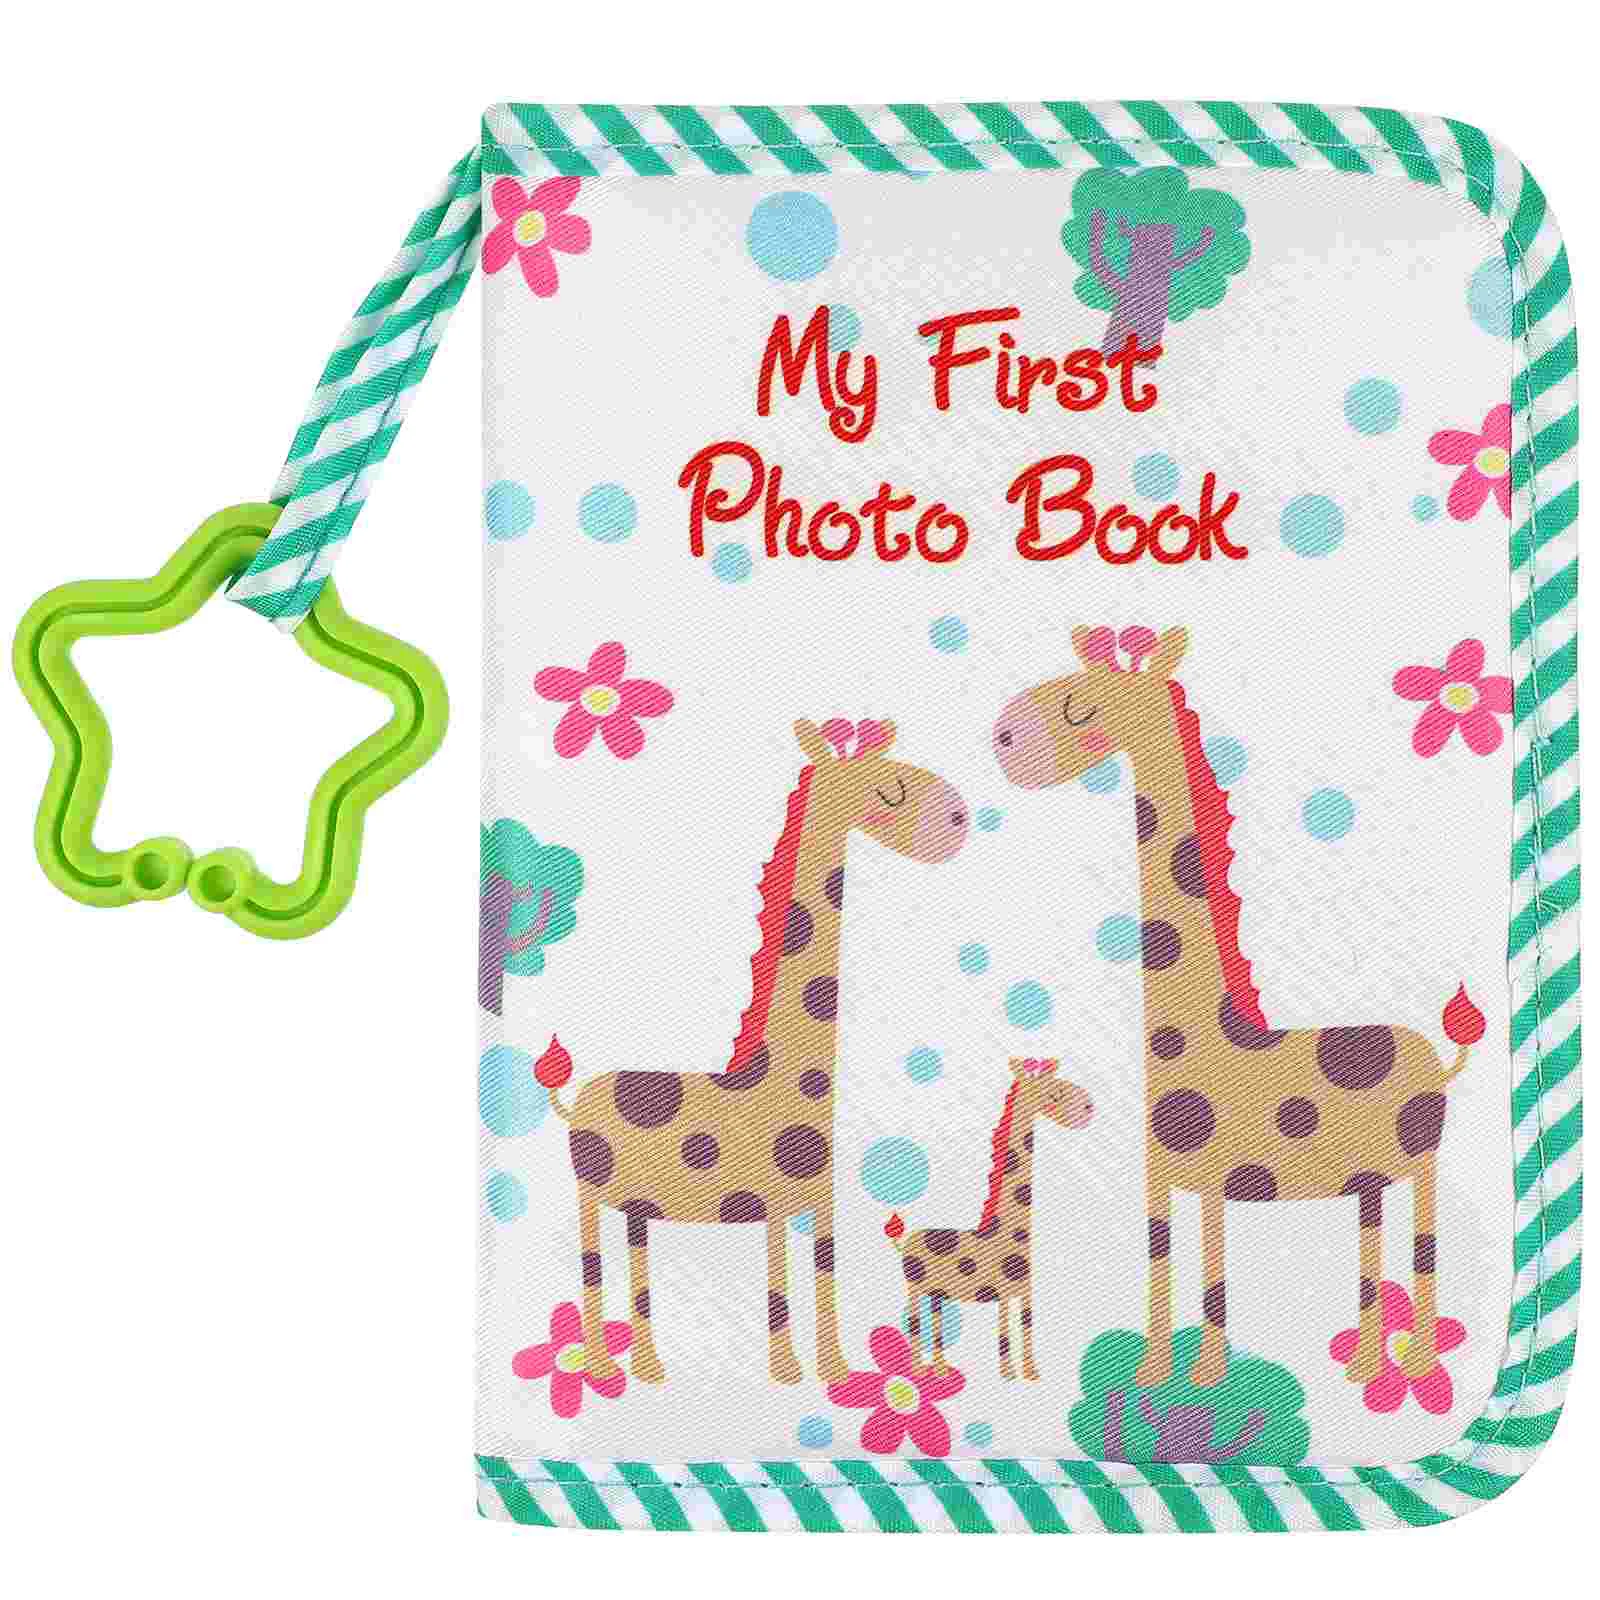 

Cloth Baby Photo Album Book Photoalbum Personalized Picture Photos Photography Albums Books Commemorate First